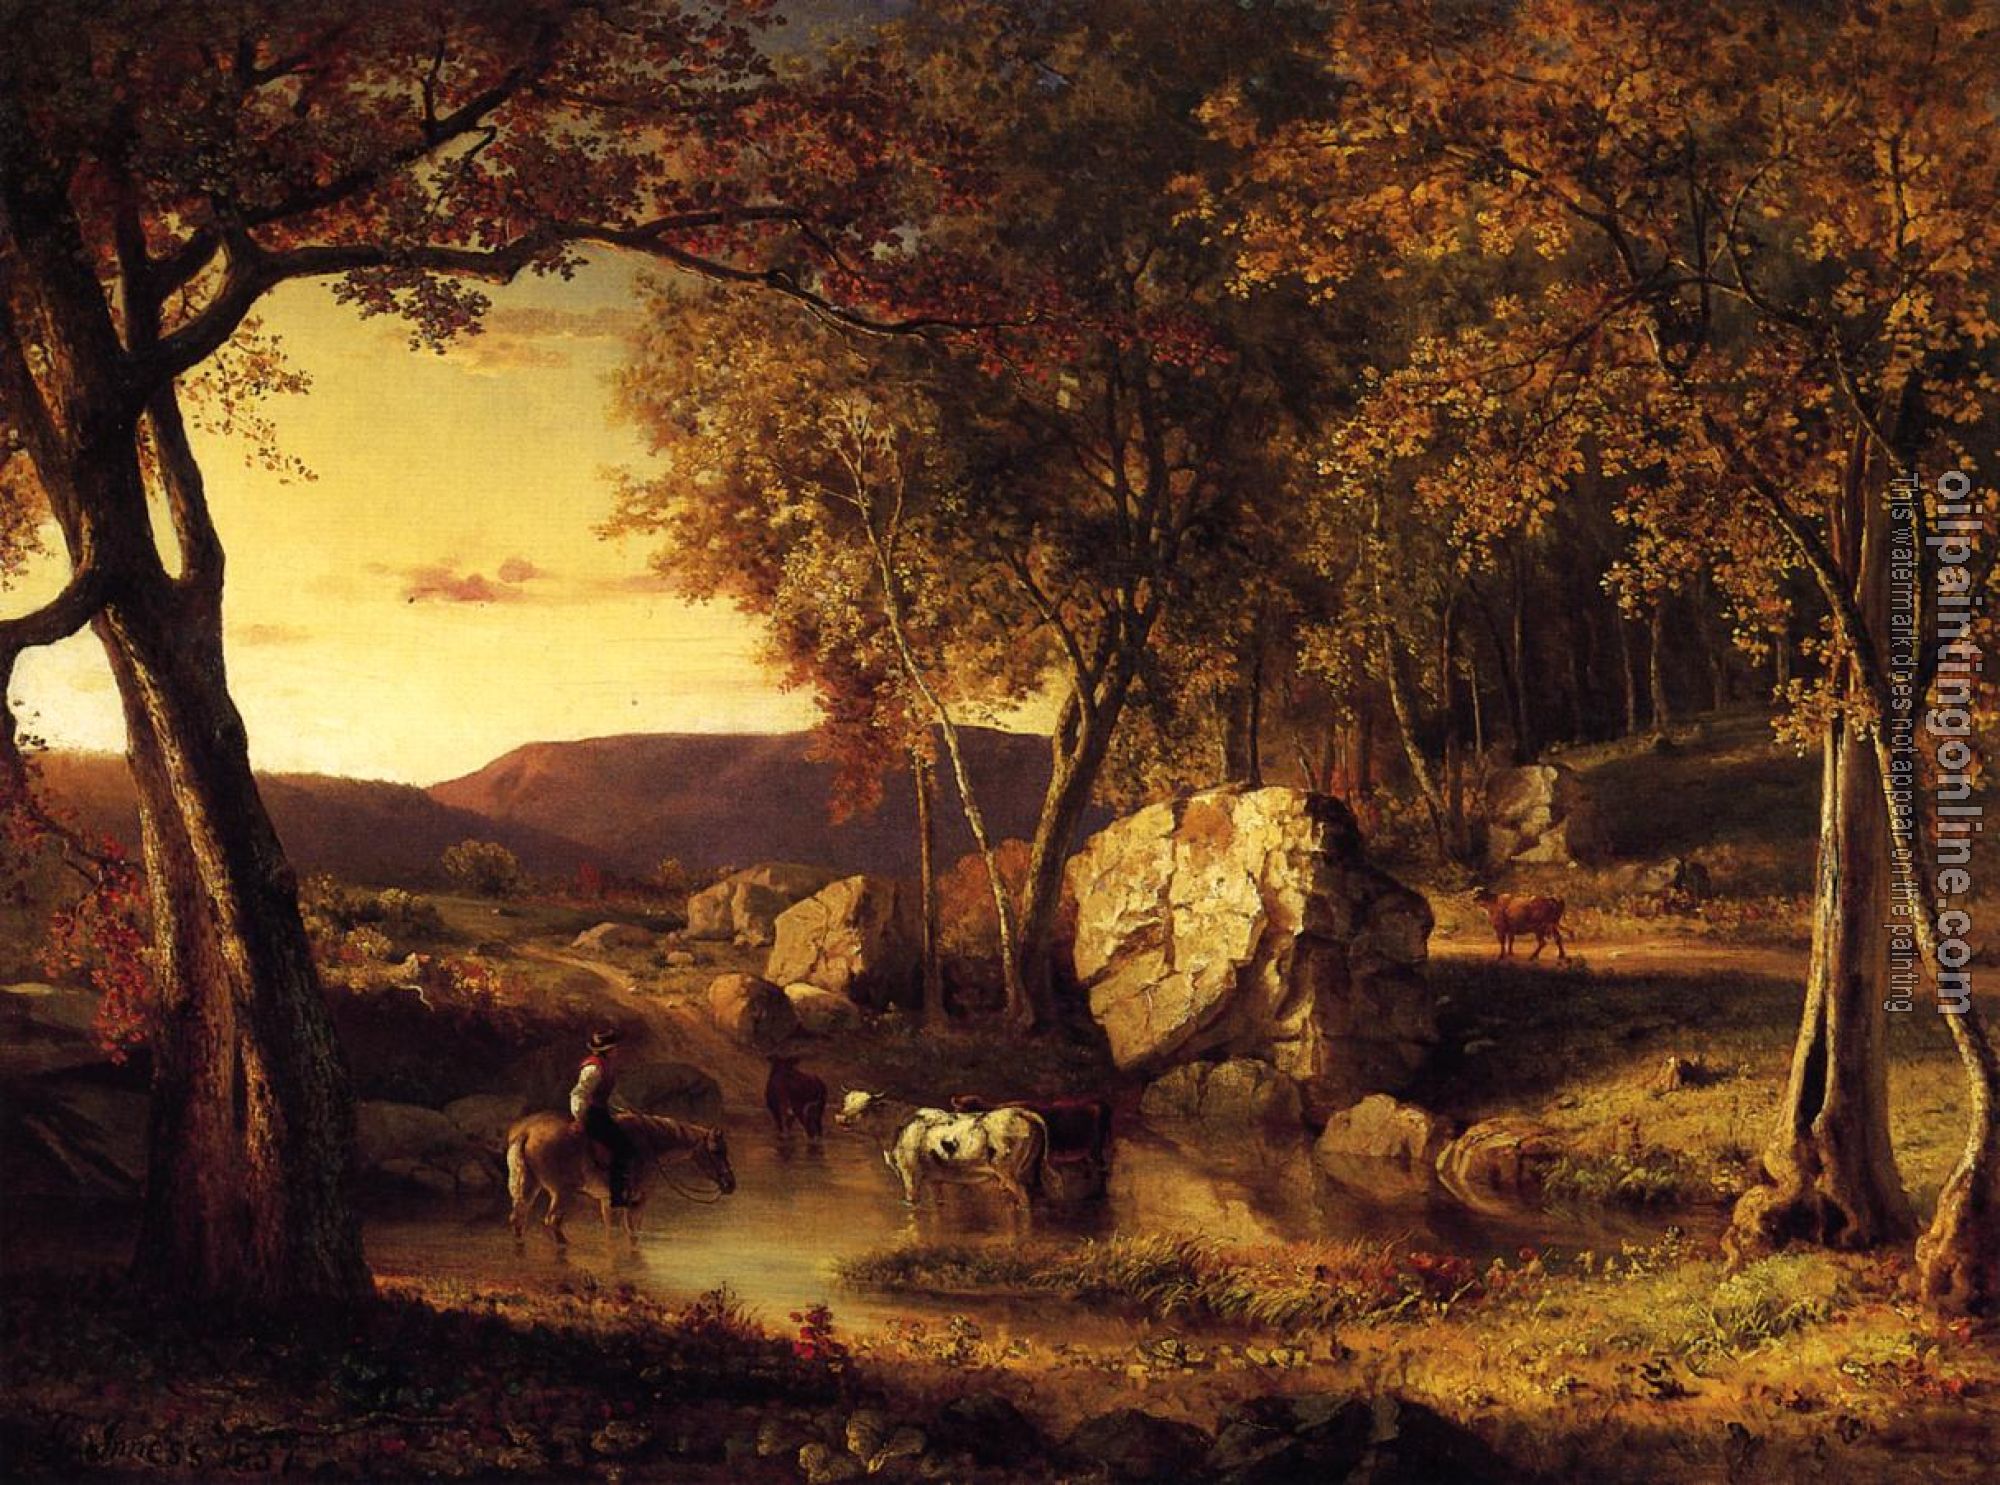 George Inness - Summer Days Cattle Drinking Late Summer Early Autumn